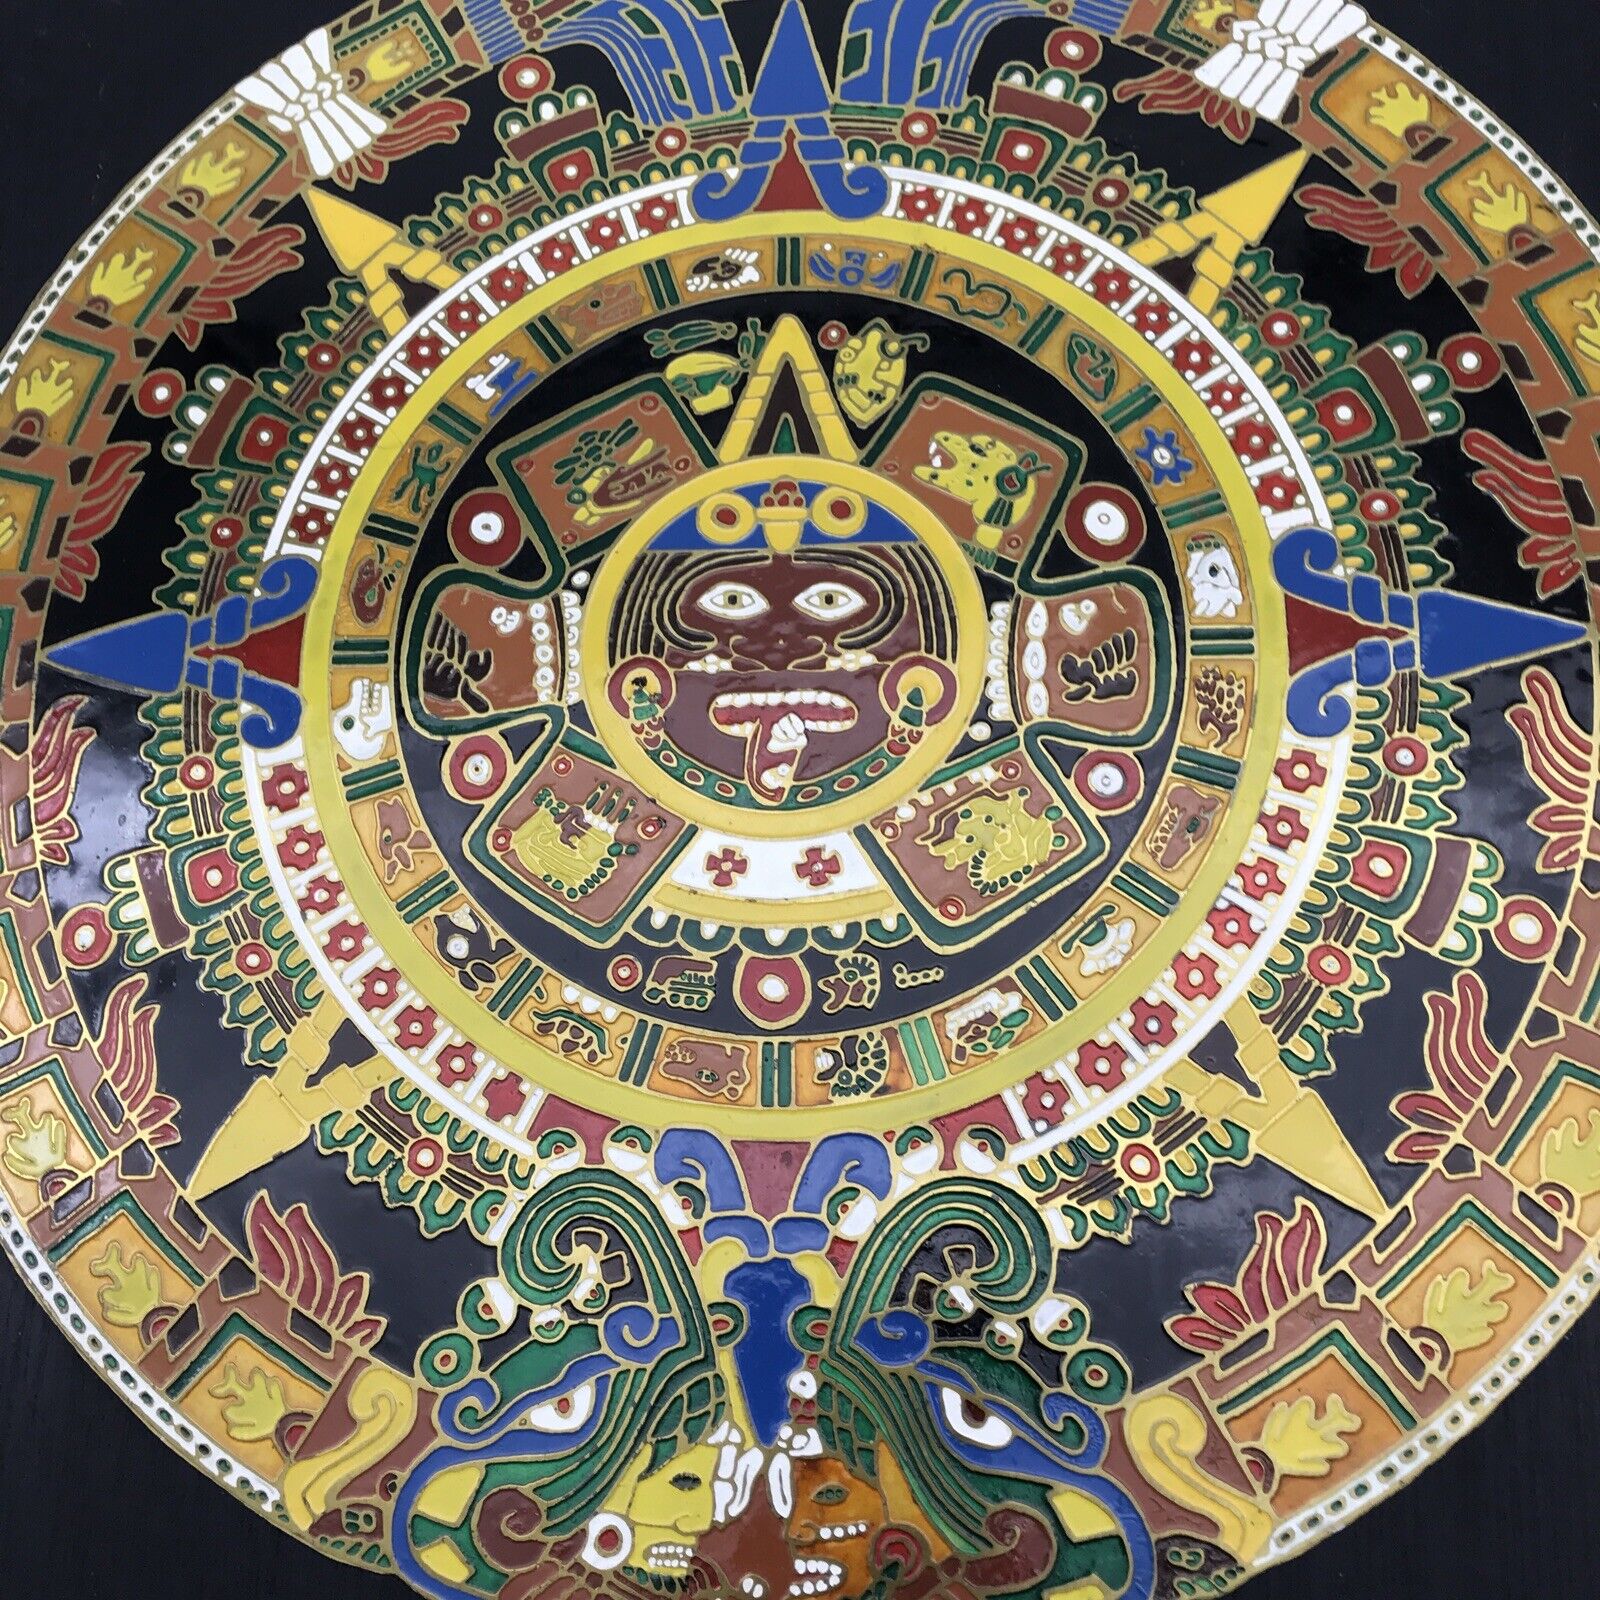 Aztec Calendar Wall Plaque Enameled Brall Wood the Sun Stone Large 16”x 16”